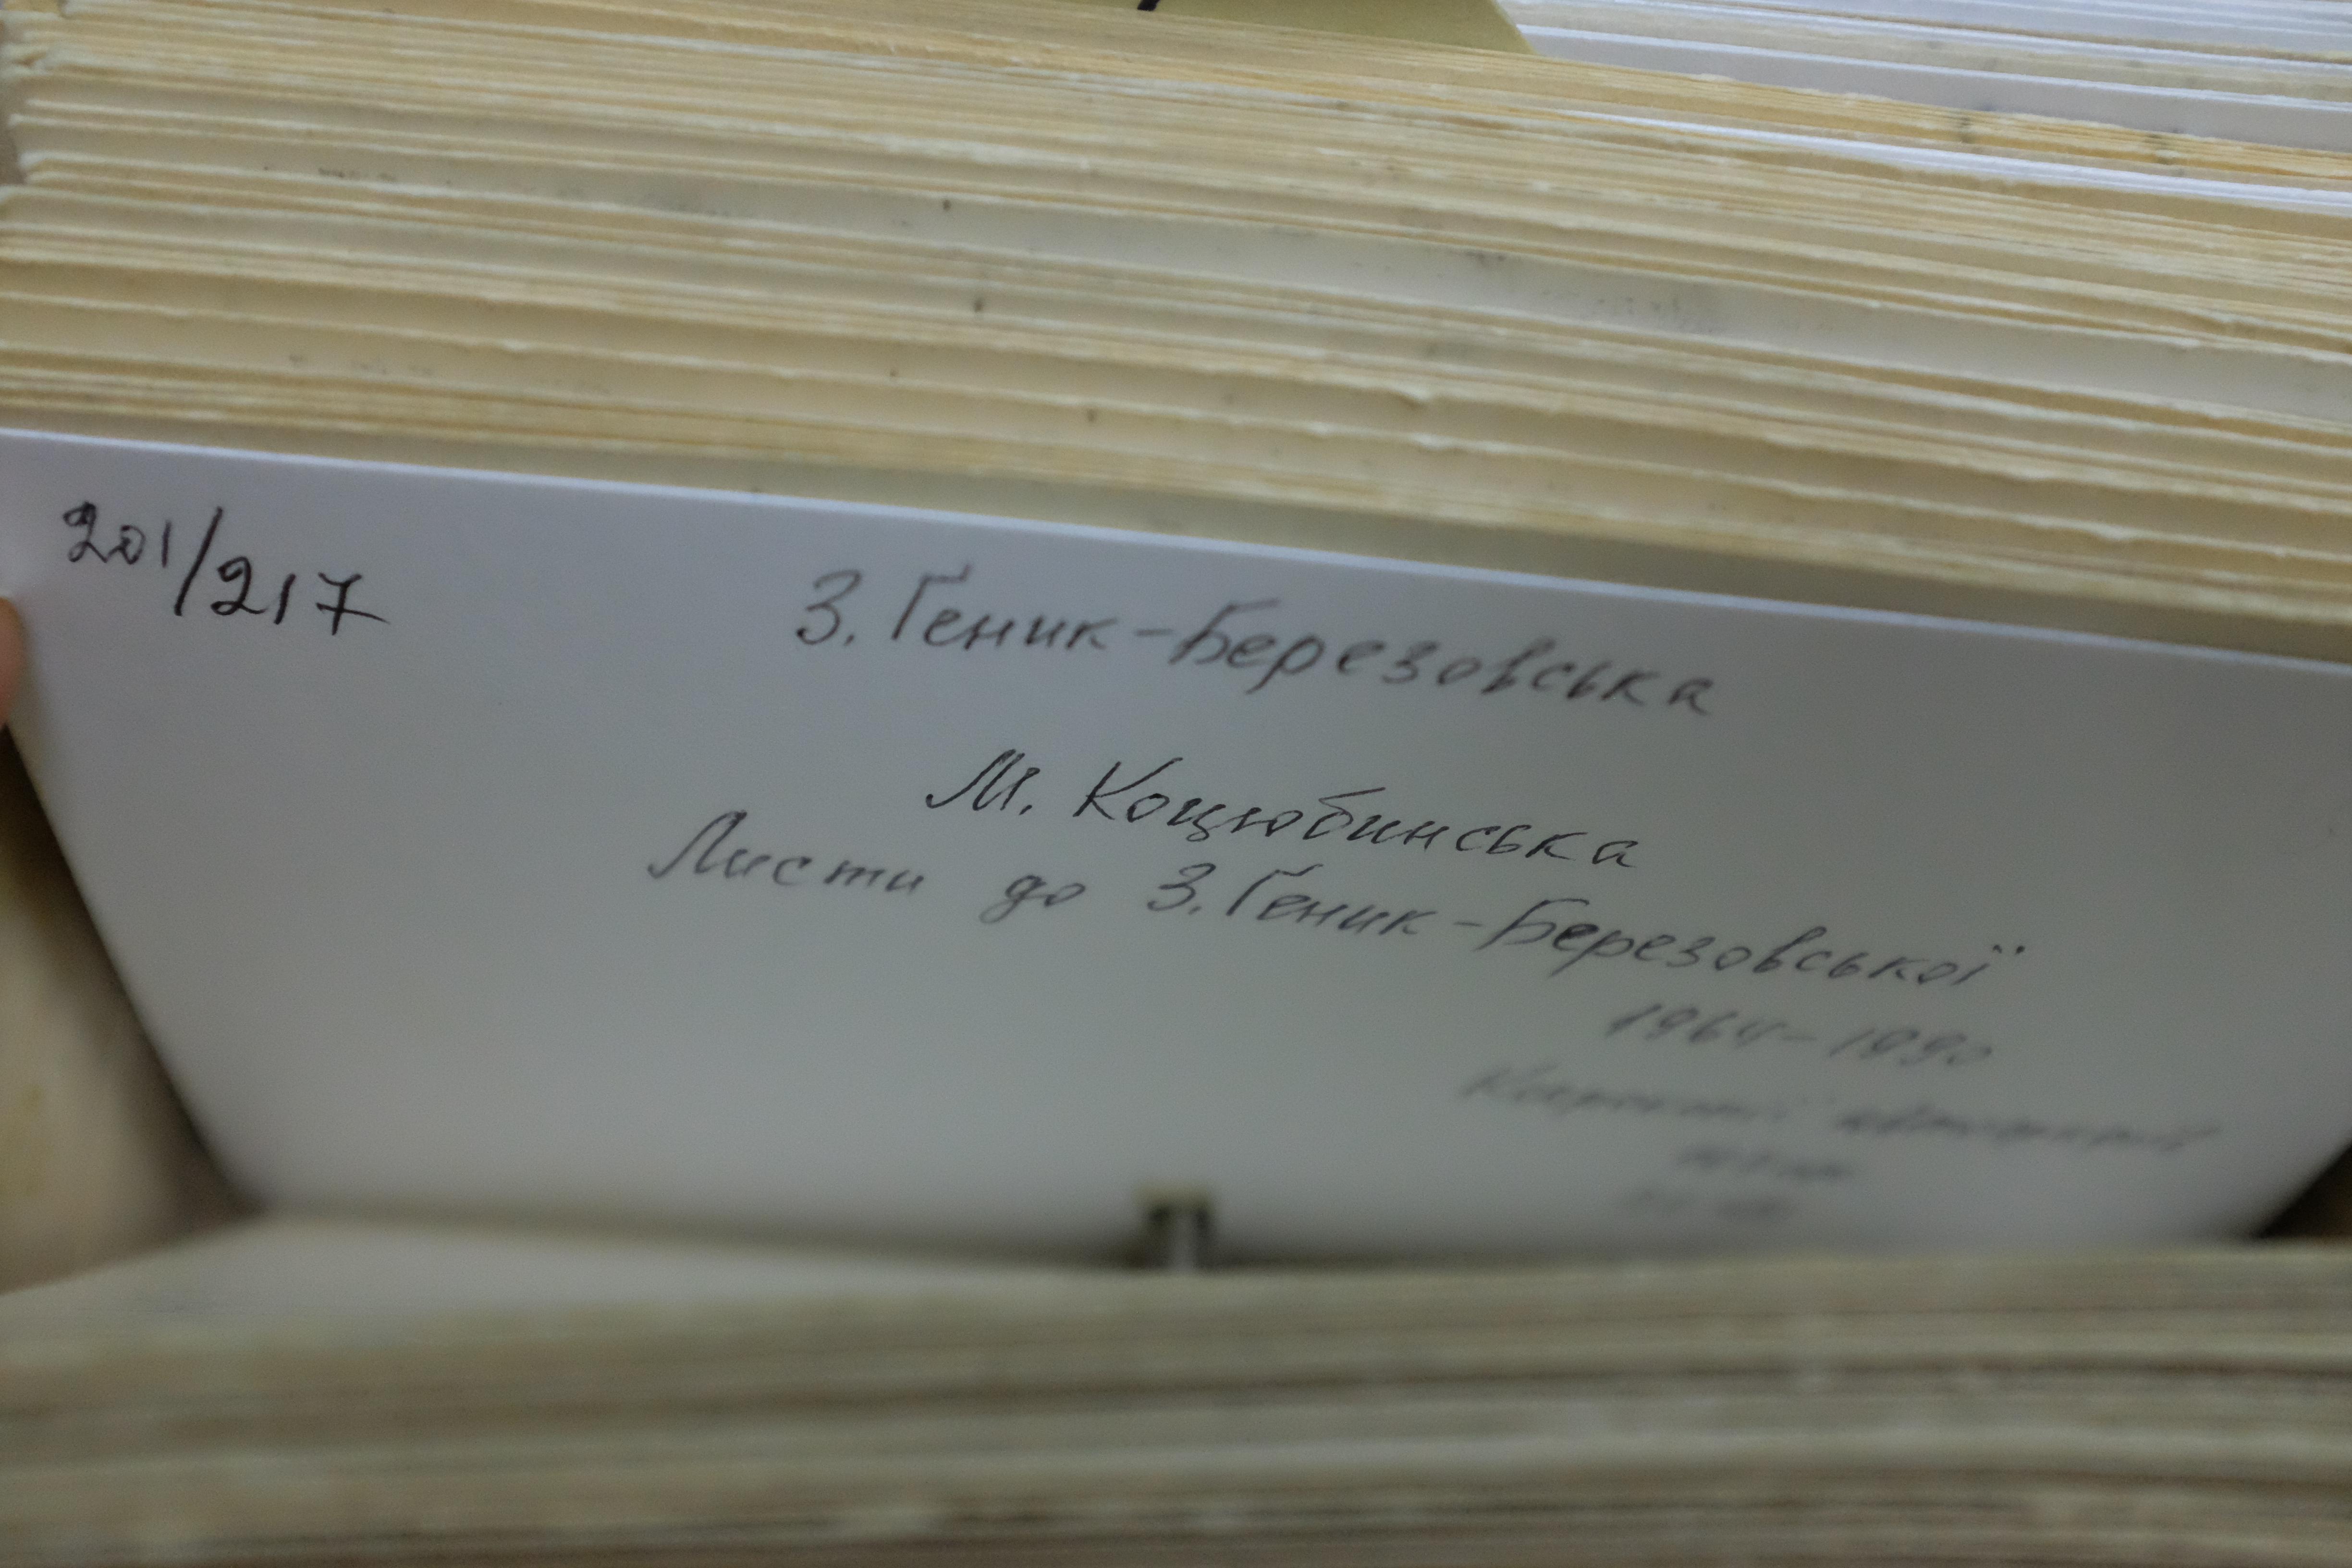 Card catalogue for the Zina Genyk-Berezovska Collection, showing the entry for letters received from Mykhailyna Kotsiubynska. Their correspondence spanned the years 1964-1990. 